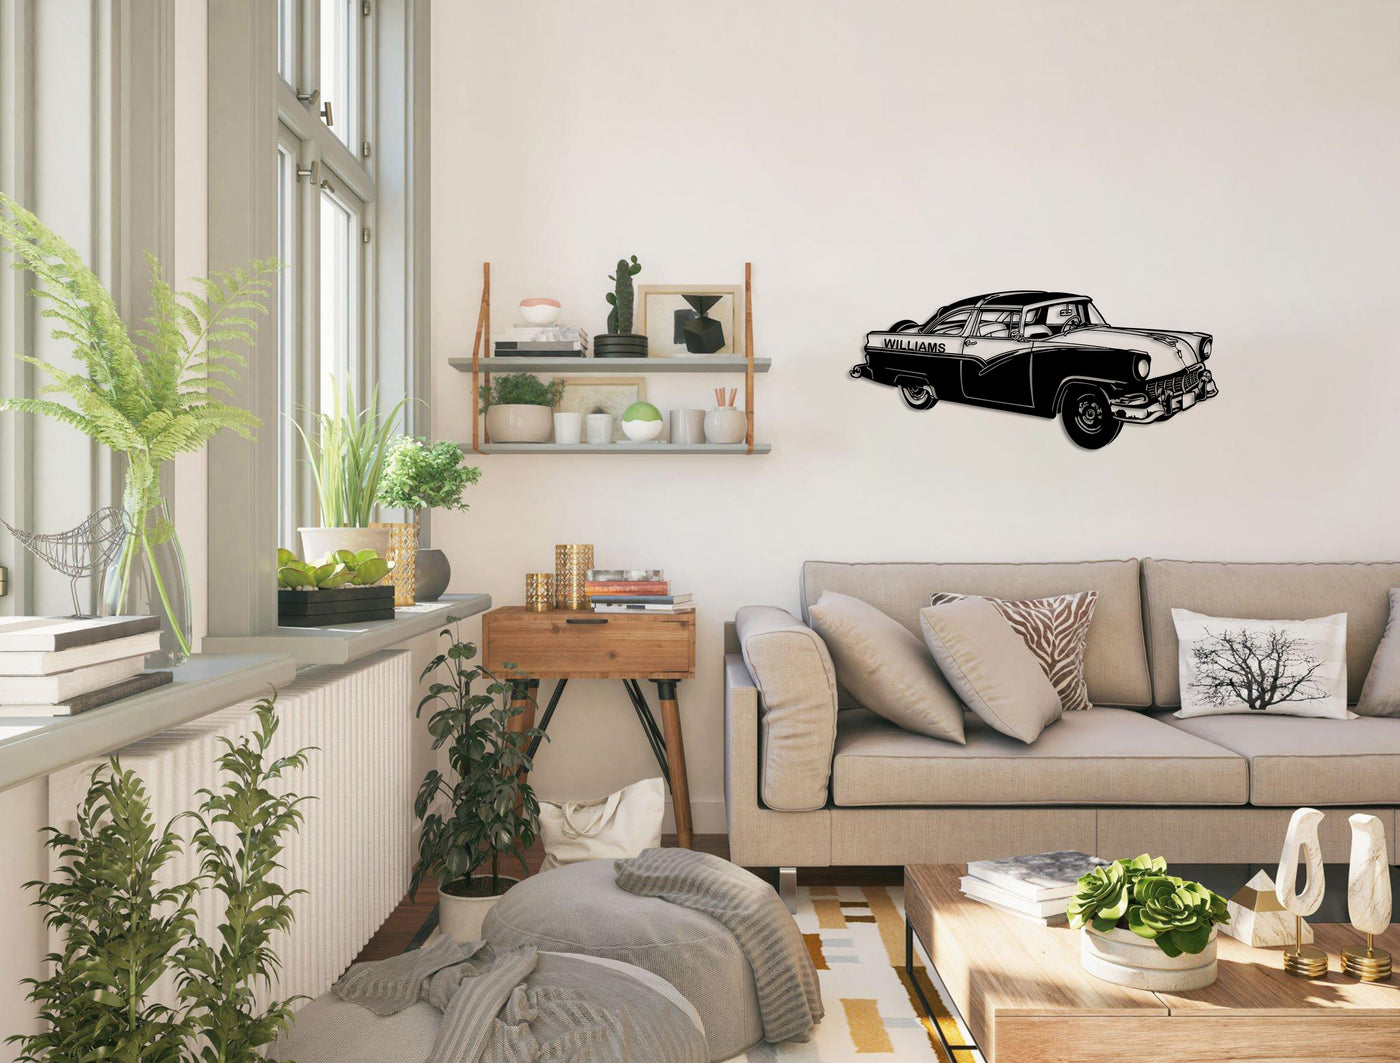 Personalized Vintage Car Metal Wall Art